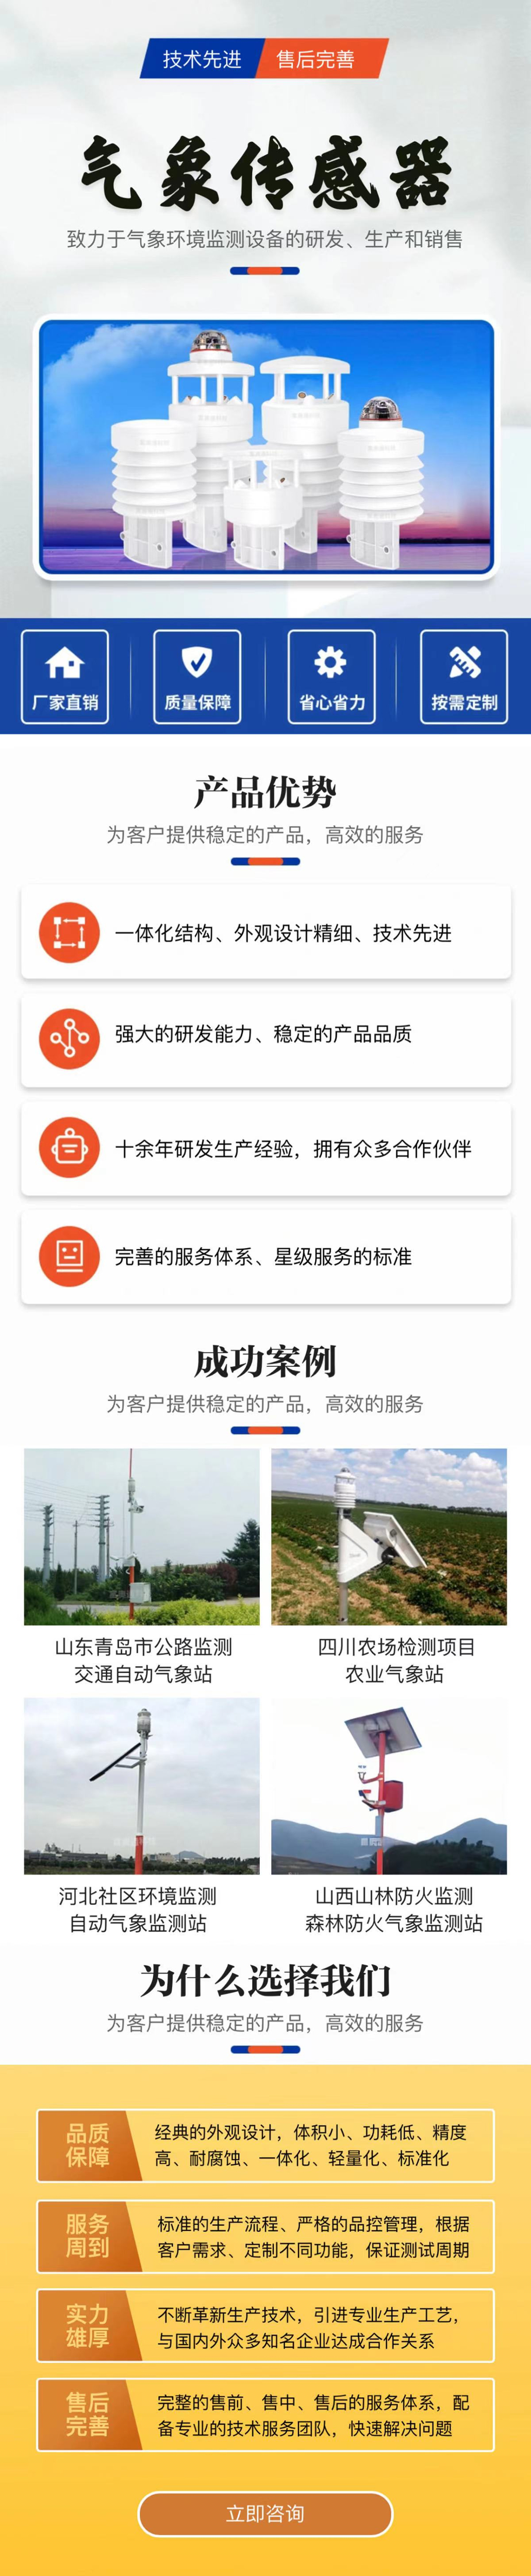 Seven element meteorological sensor, micro meteorological instrument, ultrasonic wind speed and direction indicator, Fuaotong Technology Meteorological Station